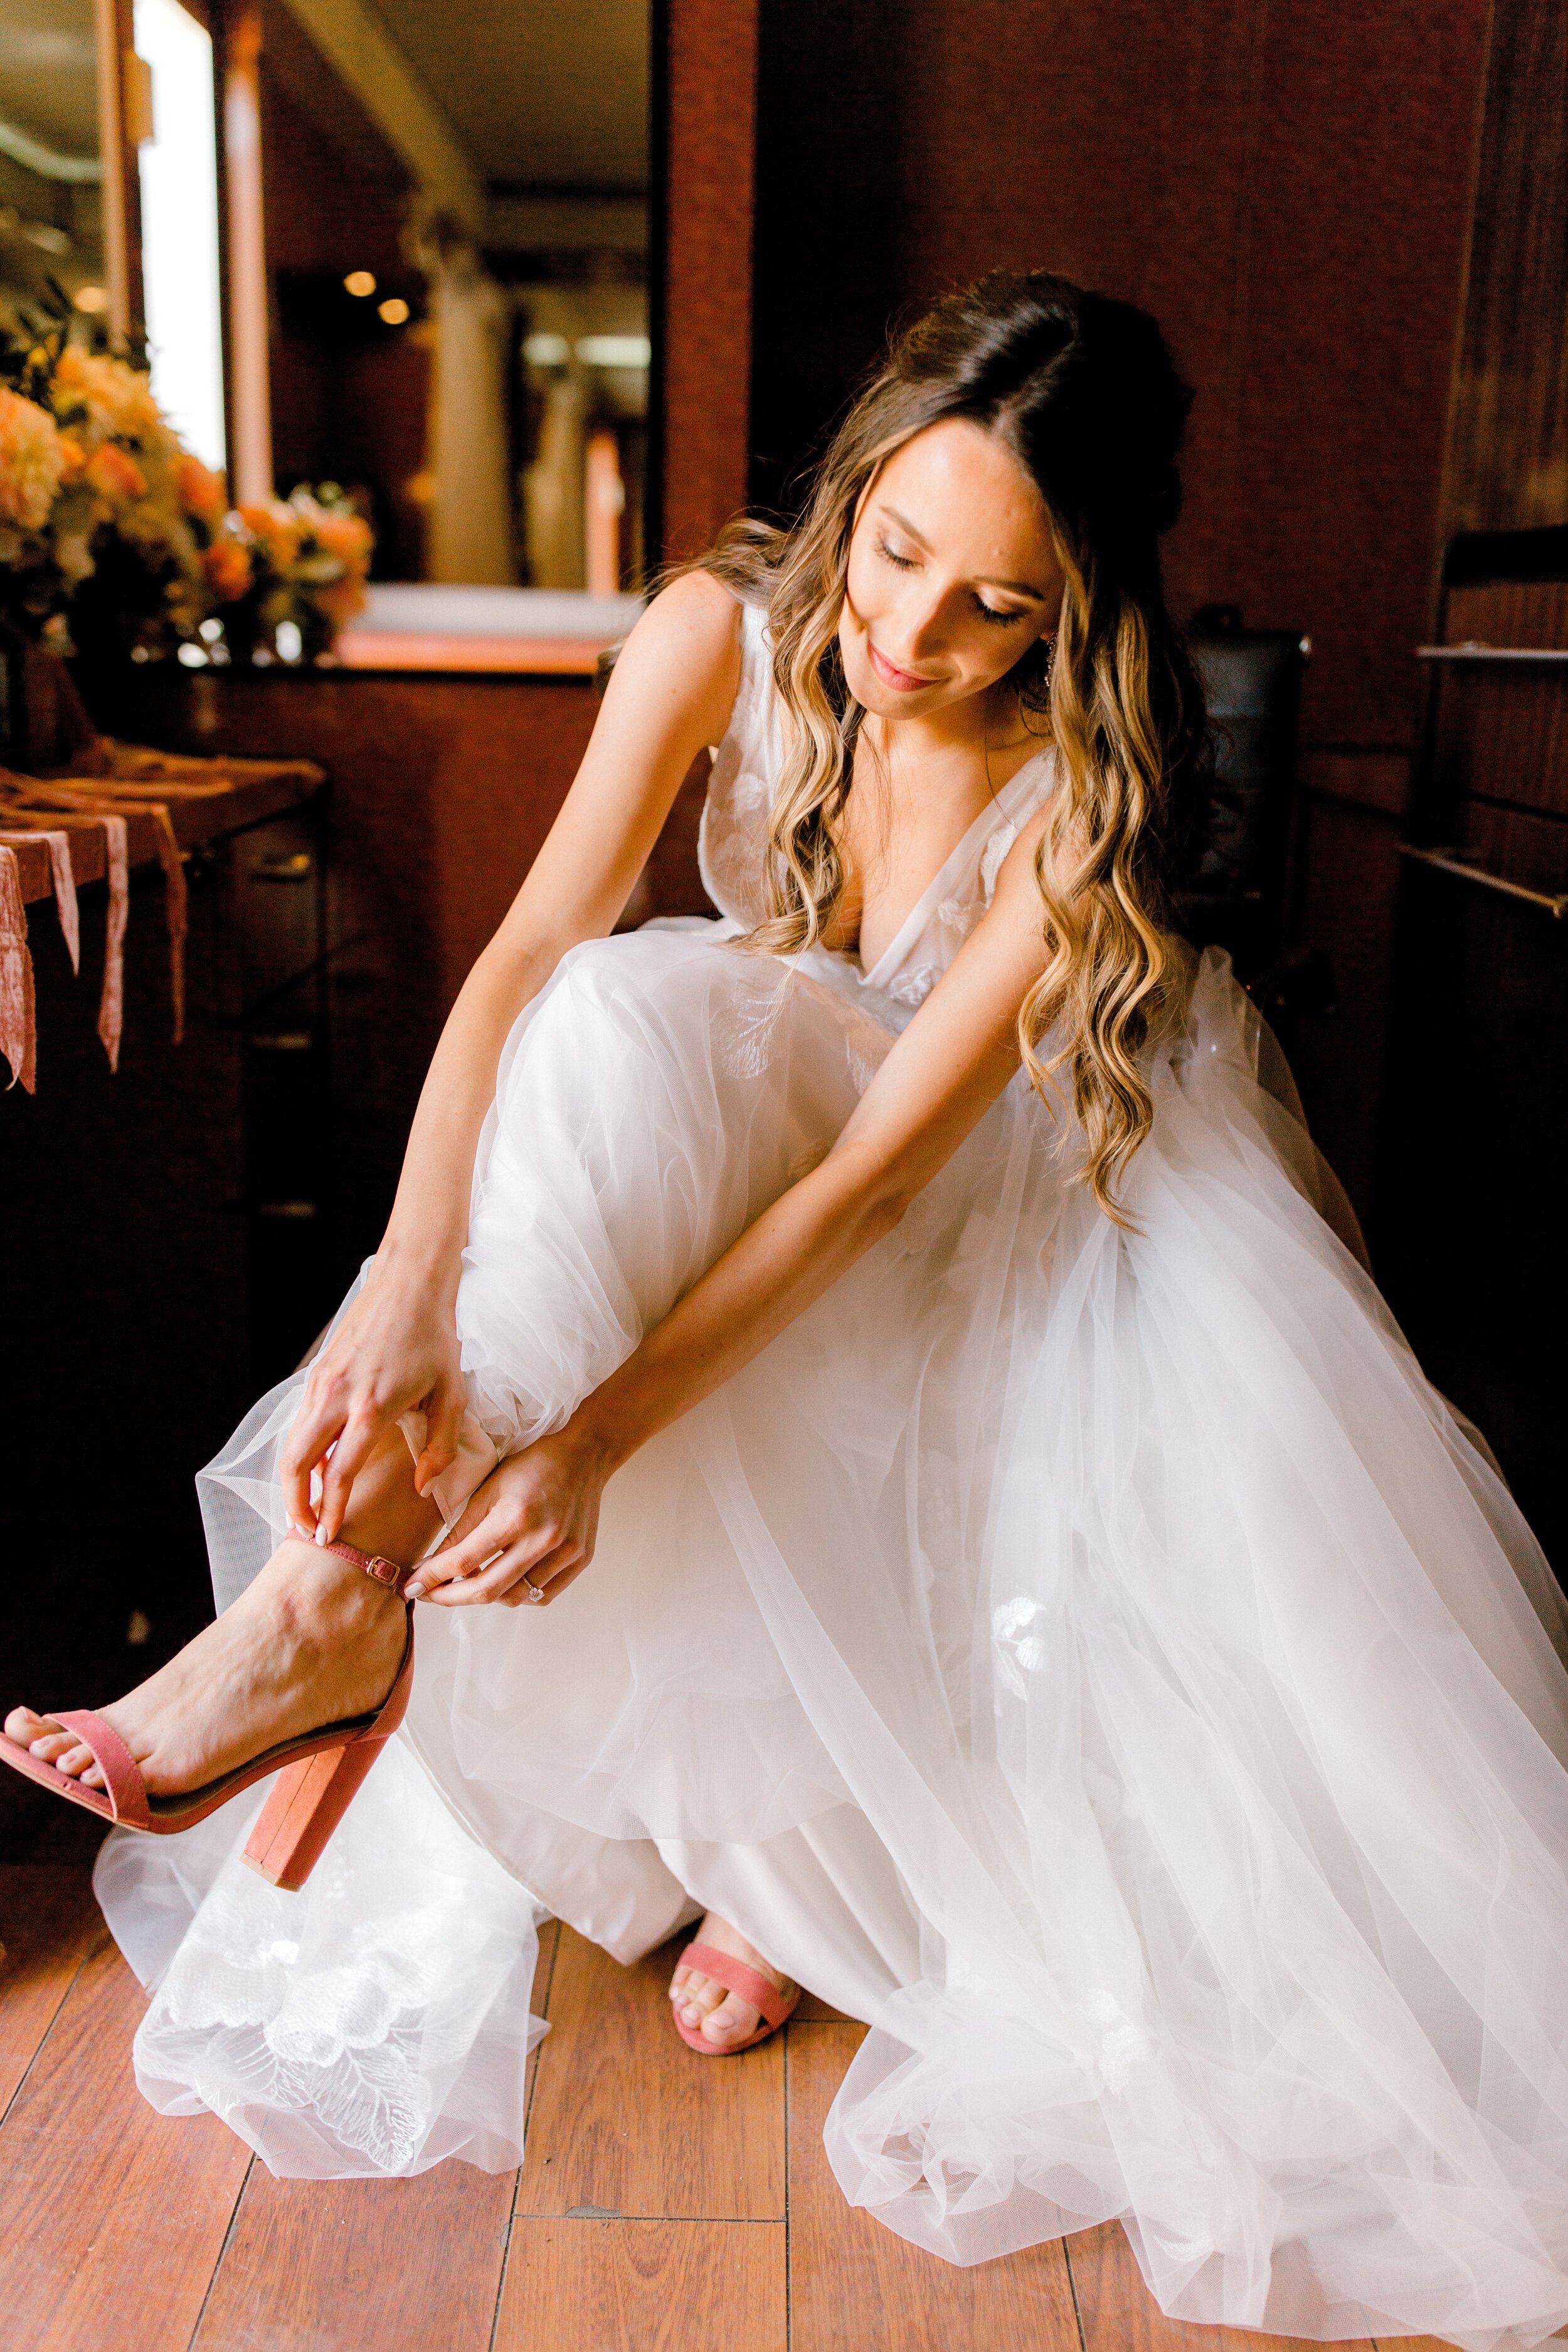 www.santabarbarawedding.com | Events by Fran | Brooke Borough Photography | Triunfo Creek Vineyards | Blushing Beauty | Lili Bridals | Bride Putting on Her Shoes